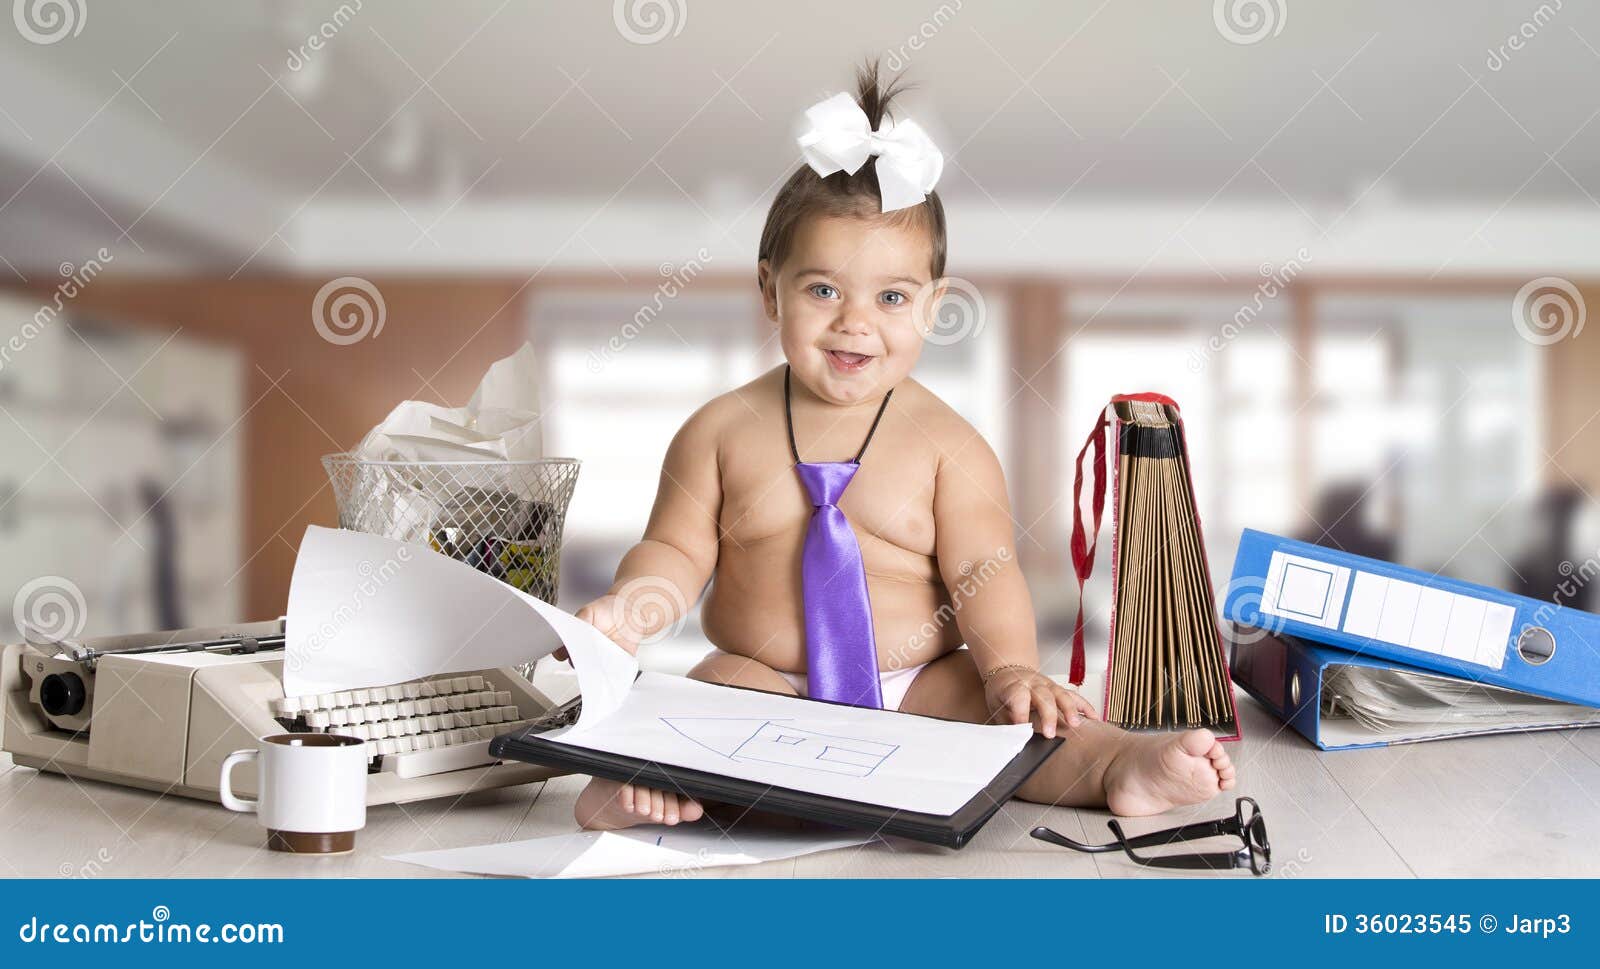 Office work baby stock image. Image of work, baby, child - 36023545